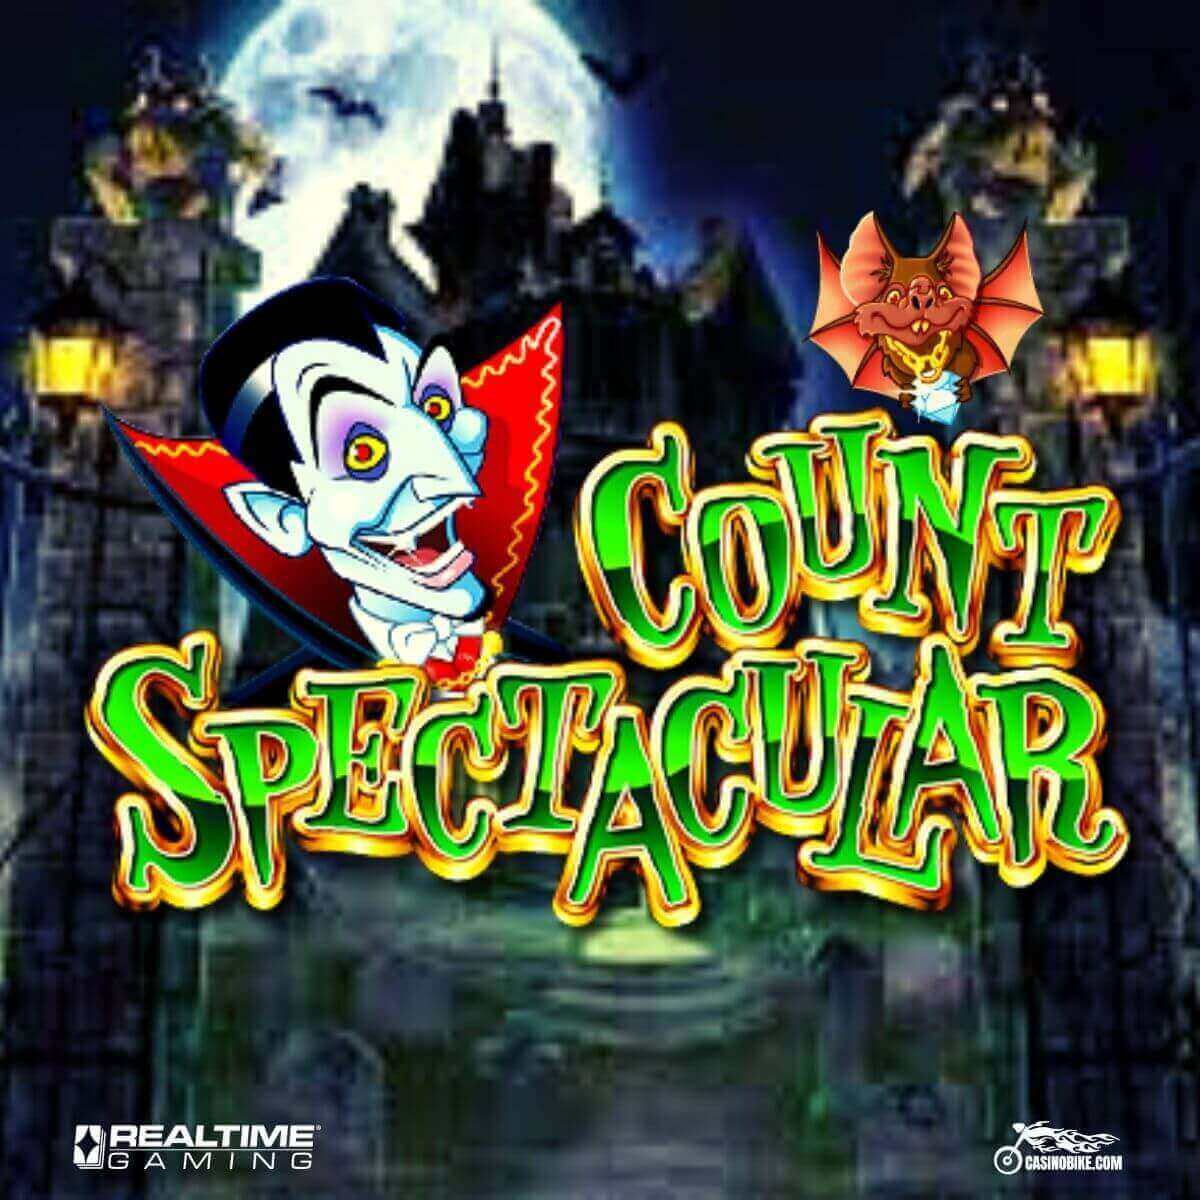 Count Spectacular Slot 3 by Real Time Gaming